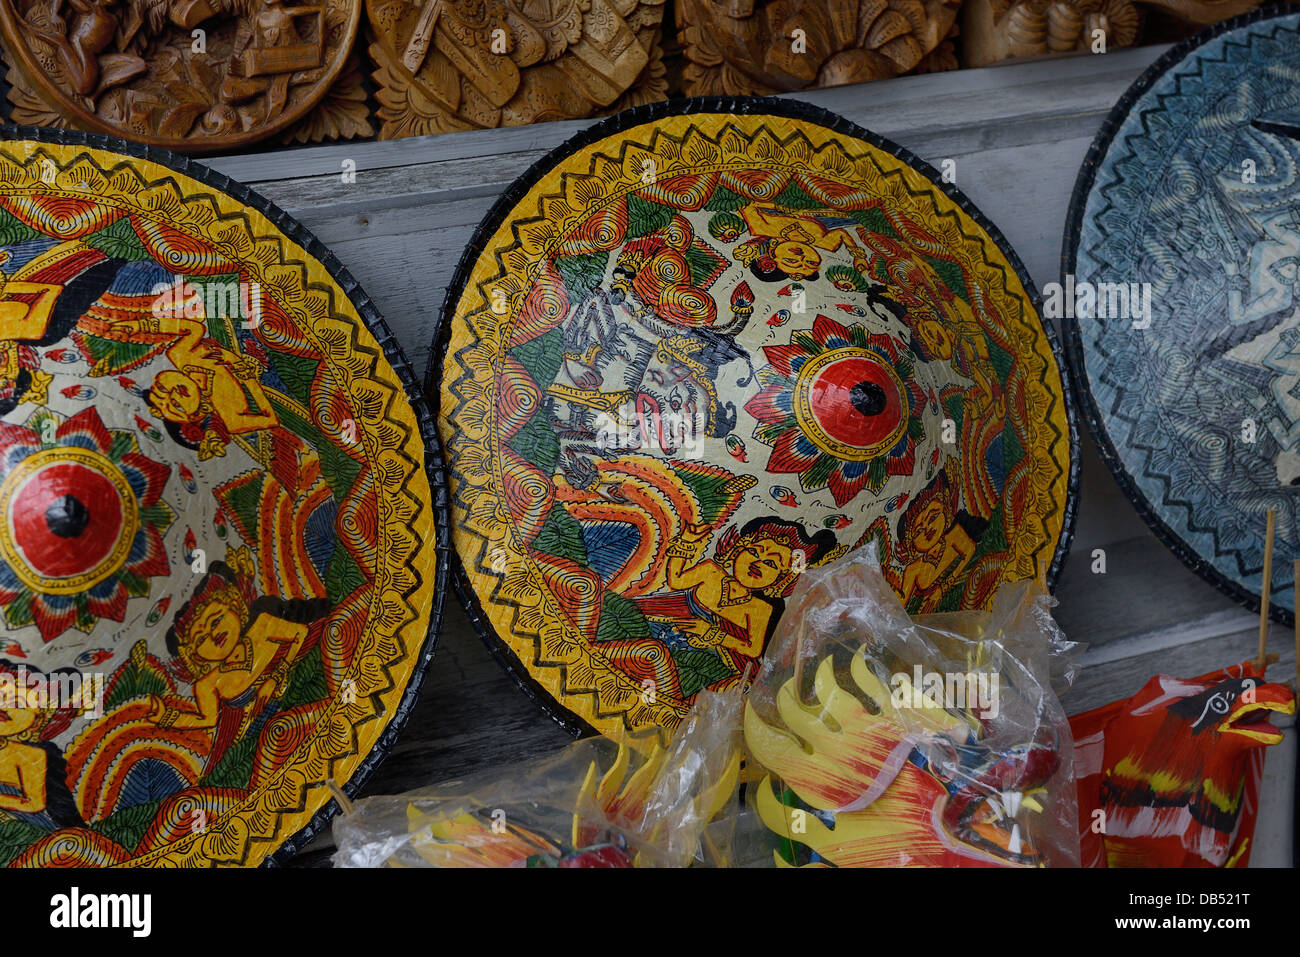 Indonesia, Bali, selling hats in a shop souvenirs at the Pura Besakih temple Stock Photo